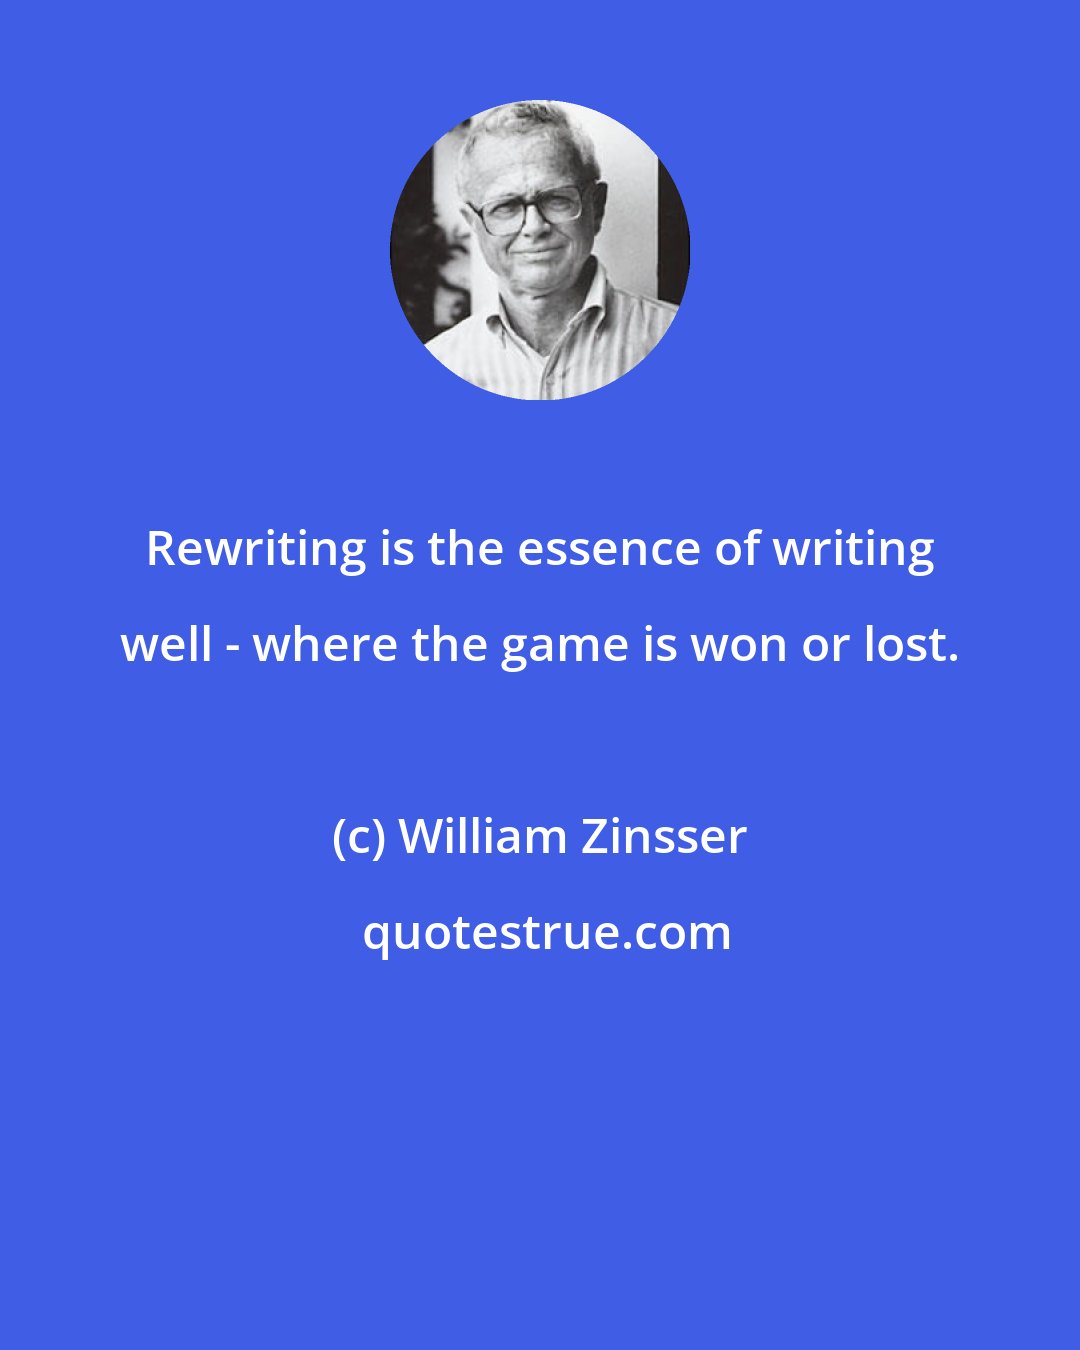 William Zinsser: Rewriting is the essence of writing well - where the game is won or lost.